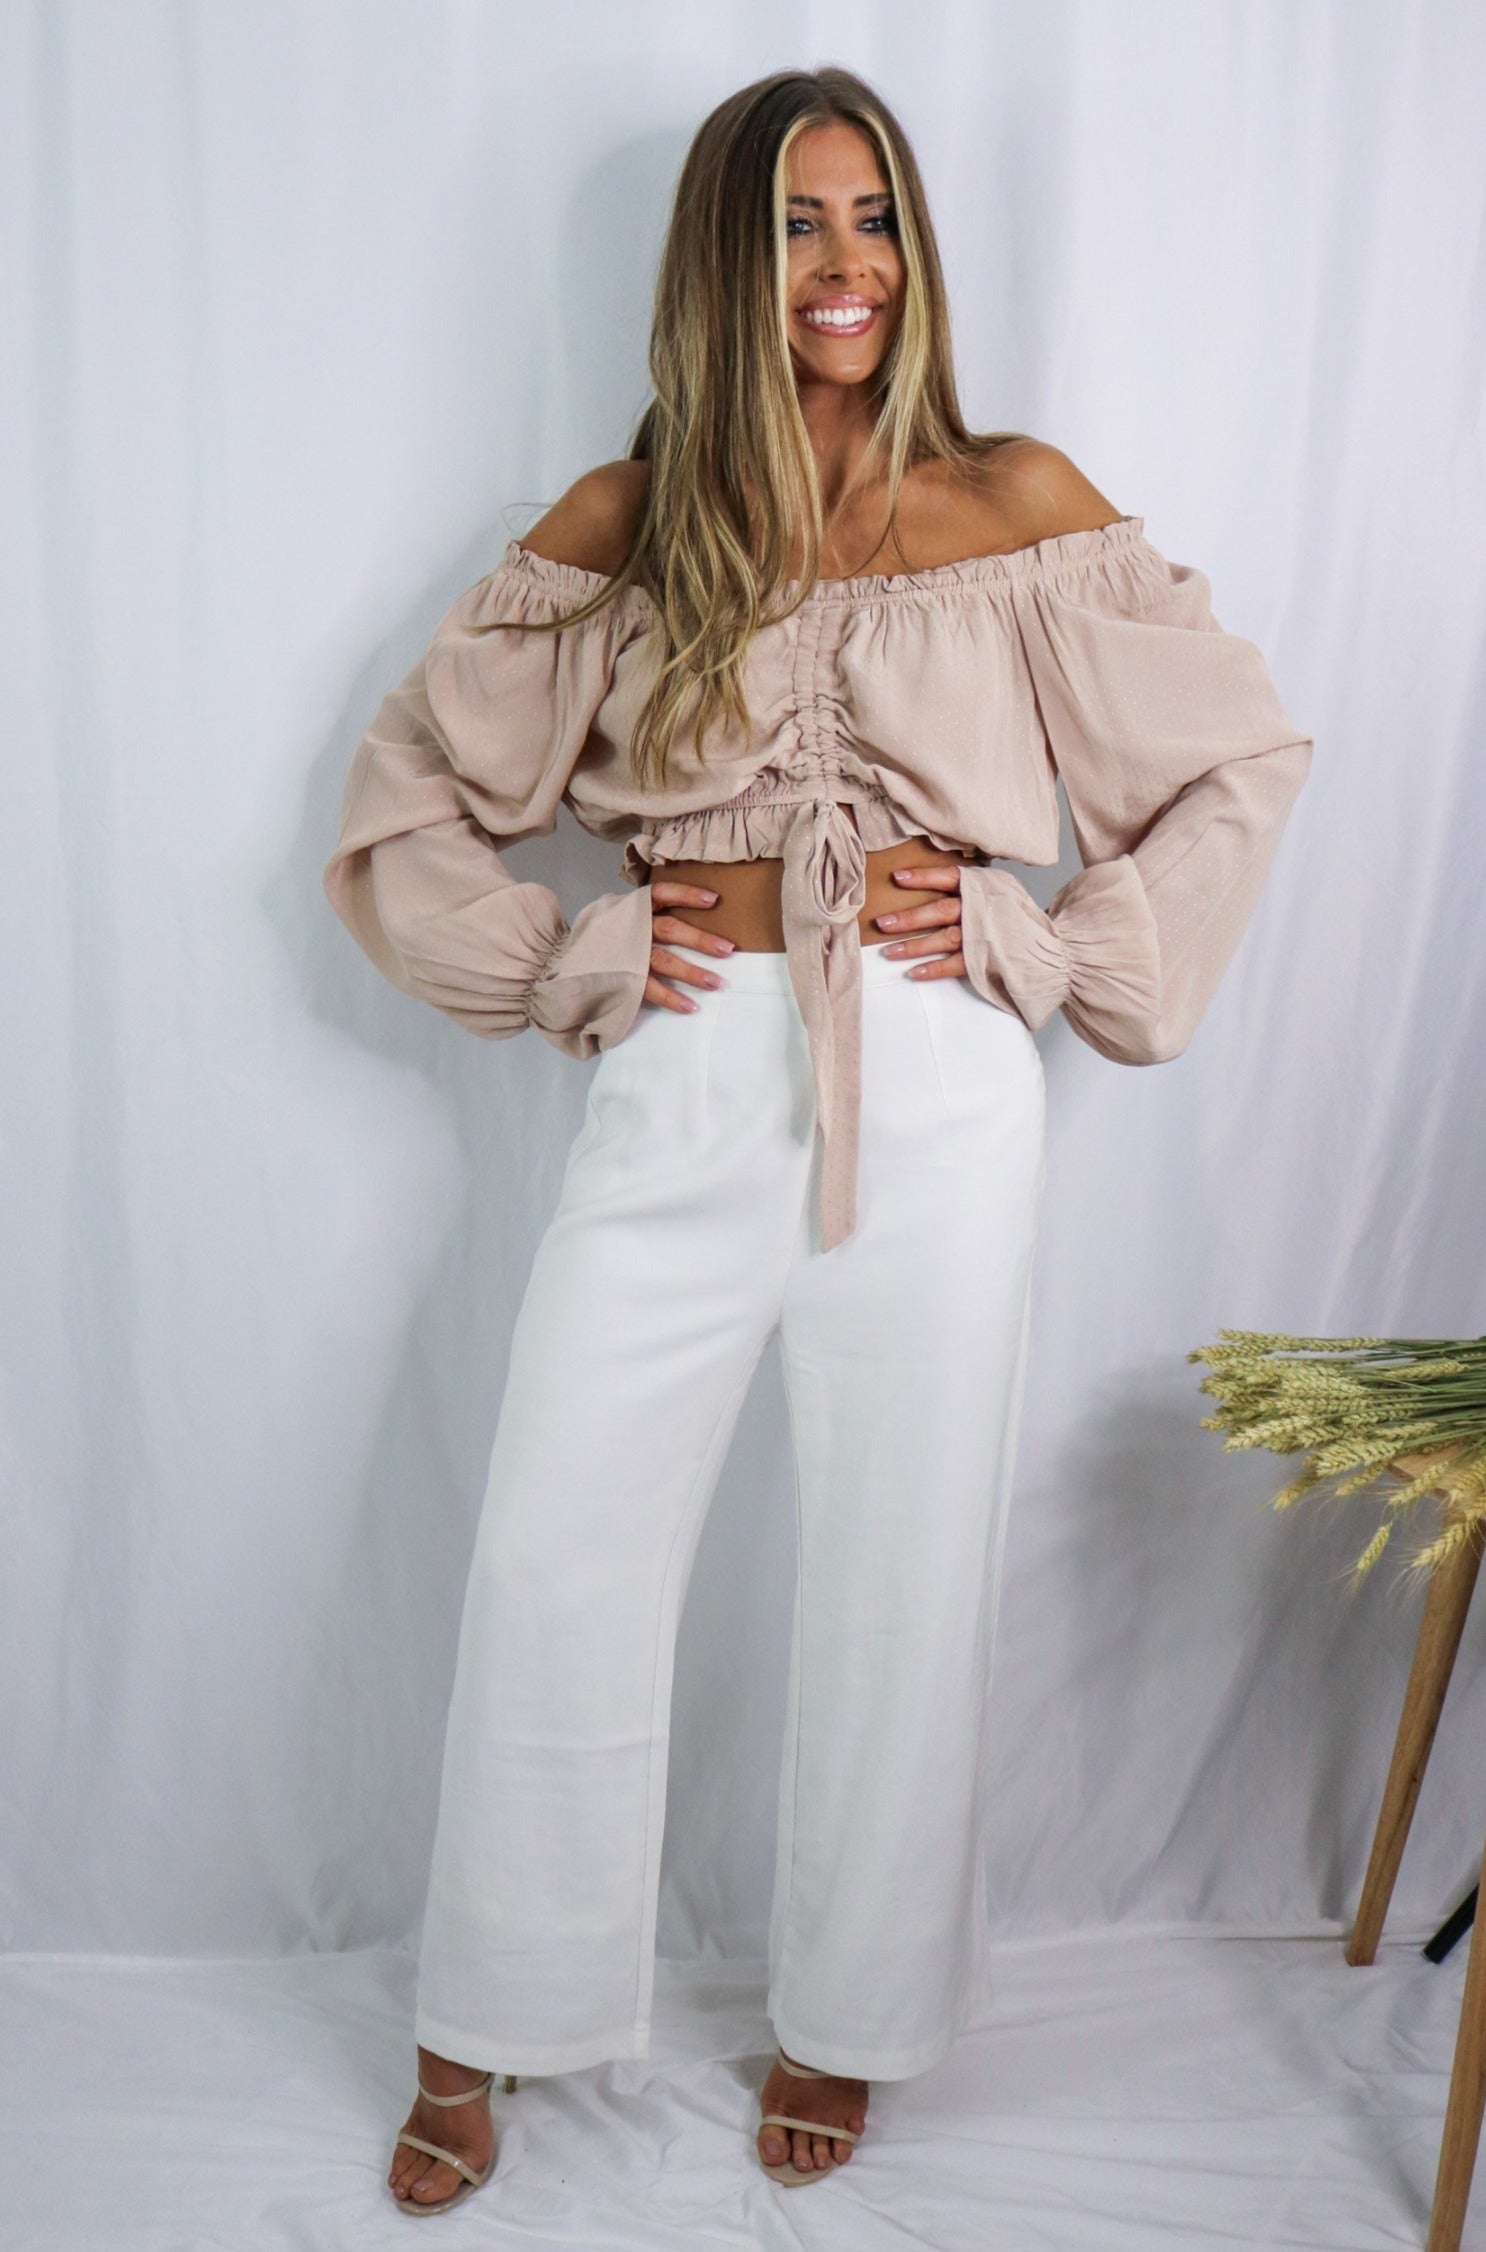 Blonde girl models an off the shoulder frilled blouse in color blush for Scarlette The Label, an online fashion boutique for women. Paired with white, wide-leg pants.